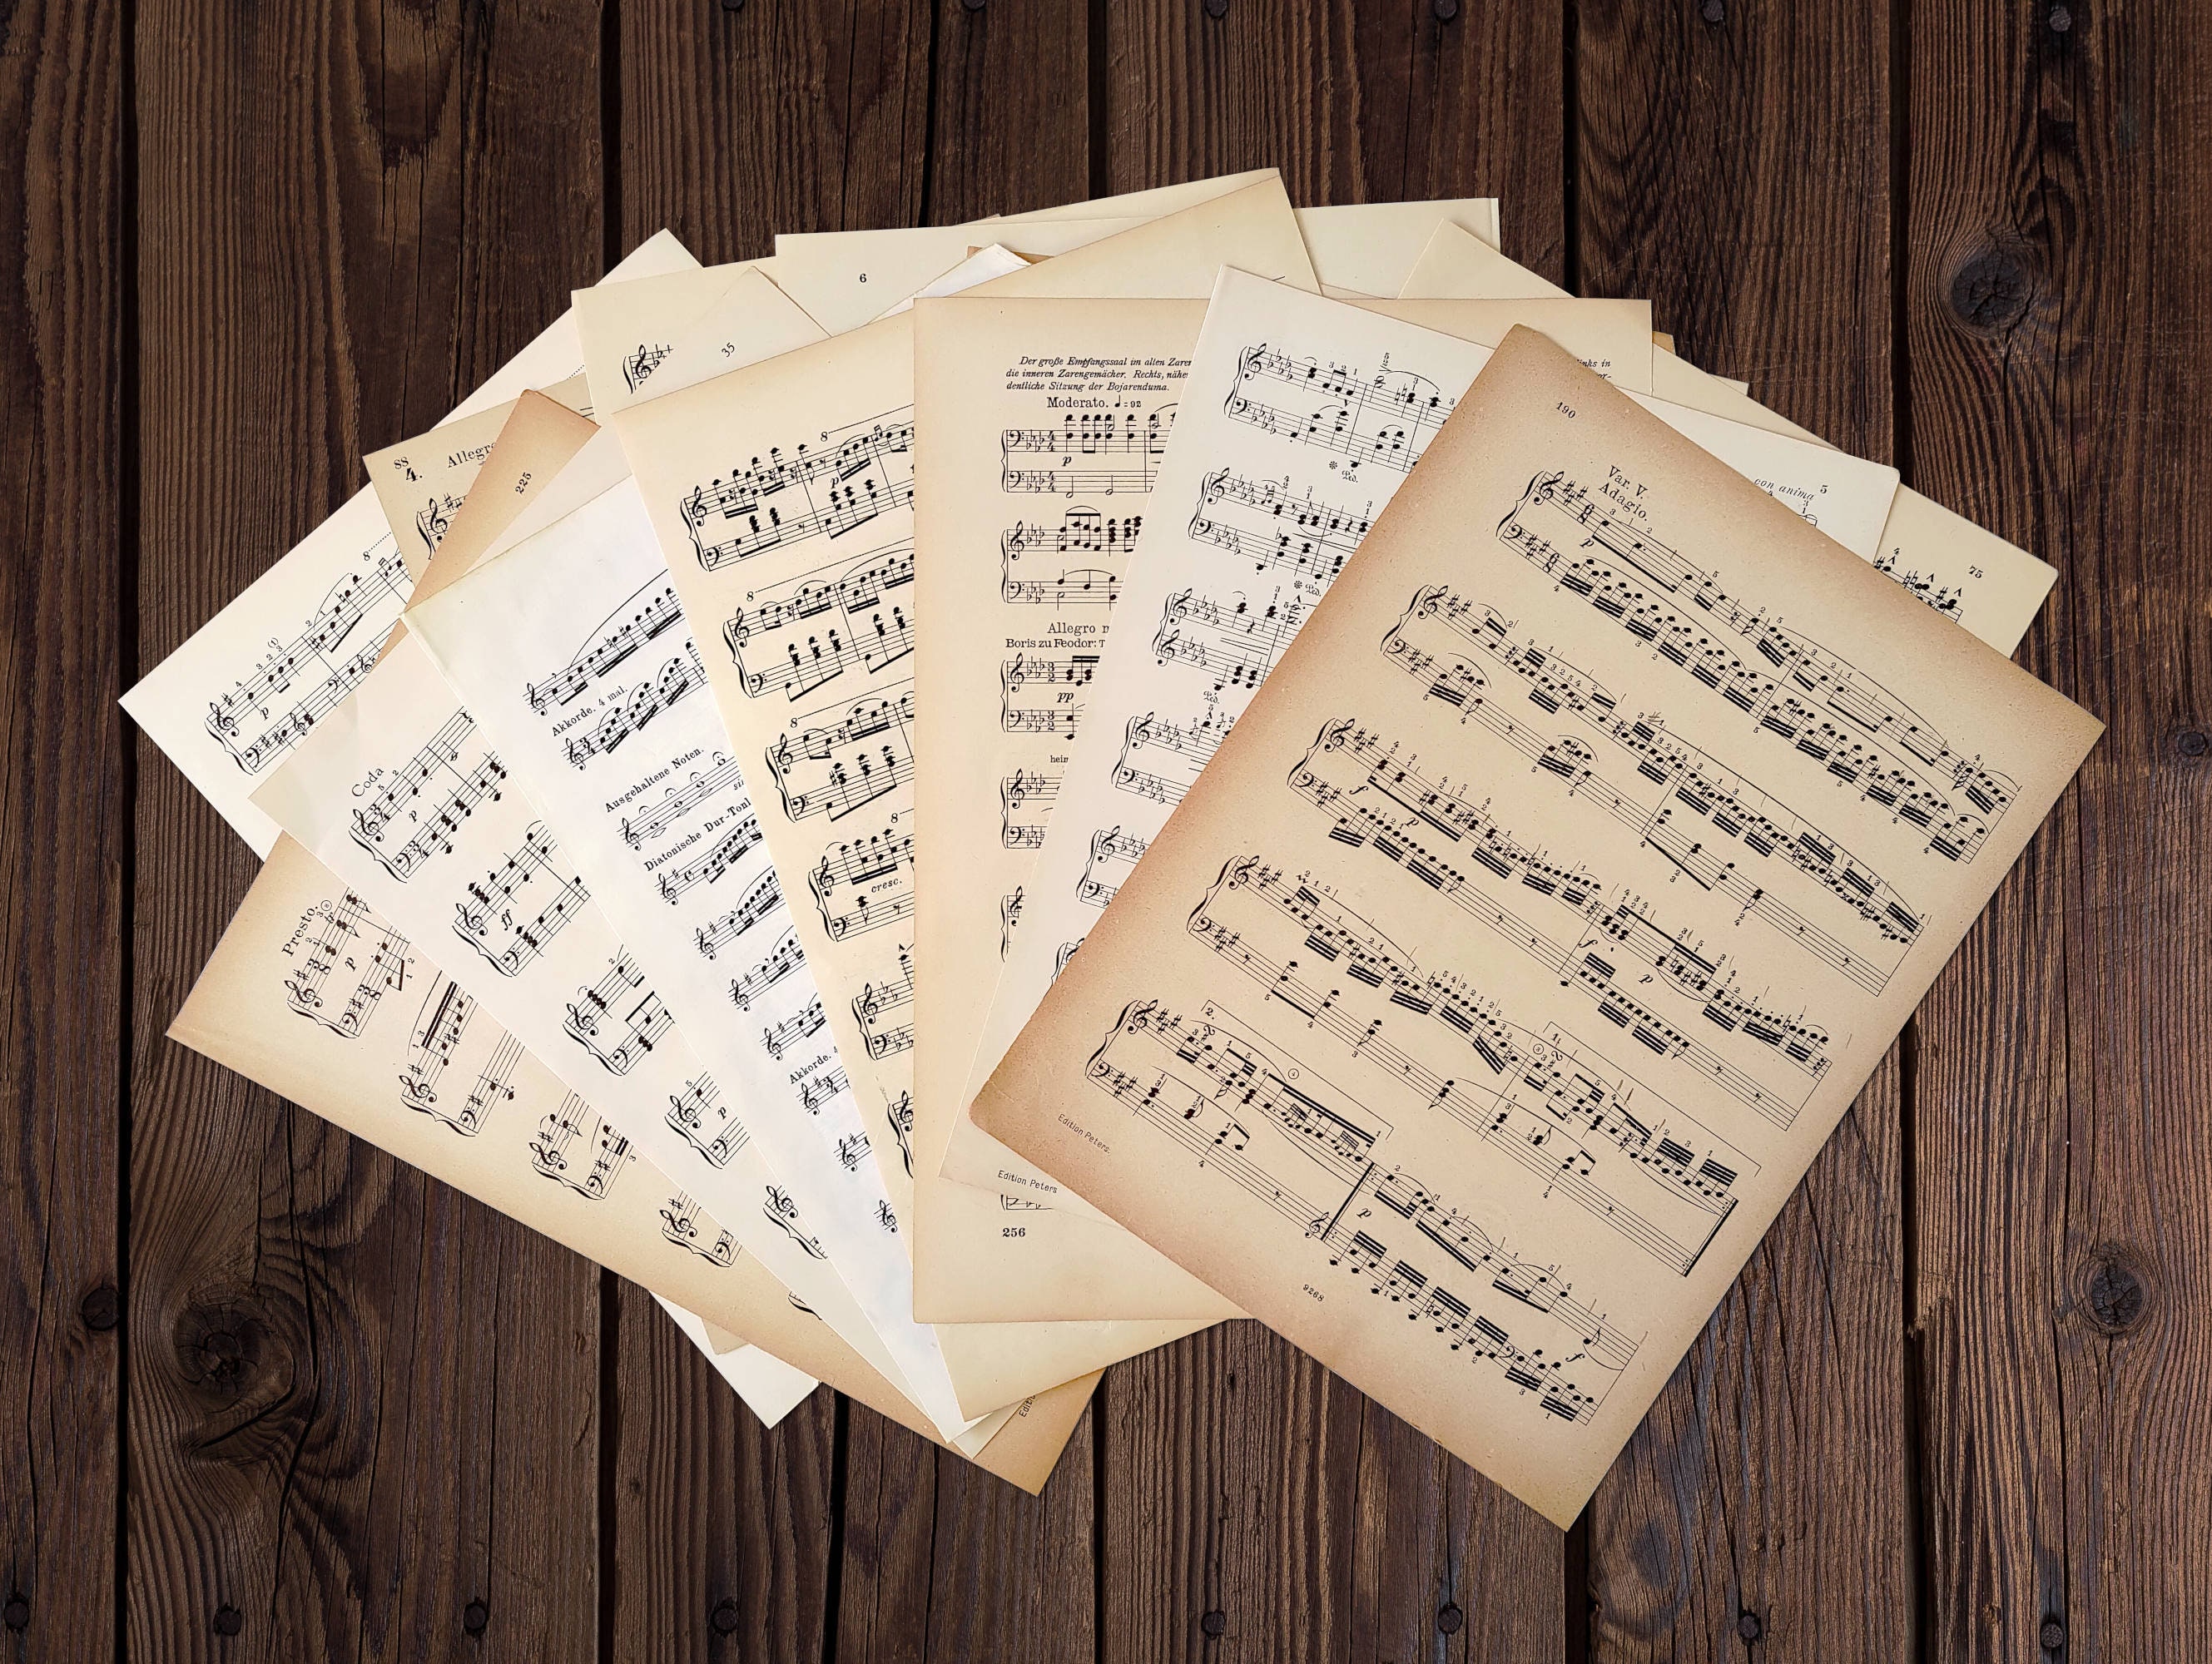 20 Sheets Vintage Music Paper Music Sheets Music Paper for Crafting 